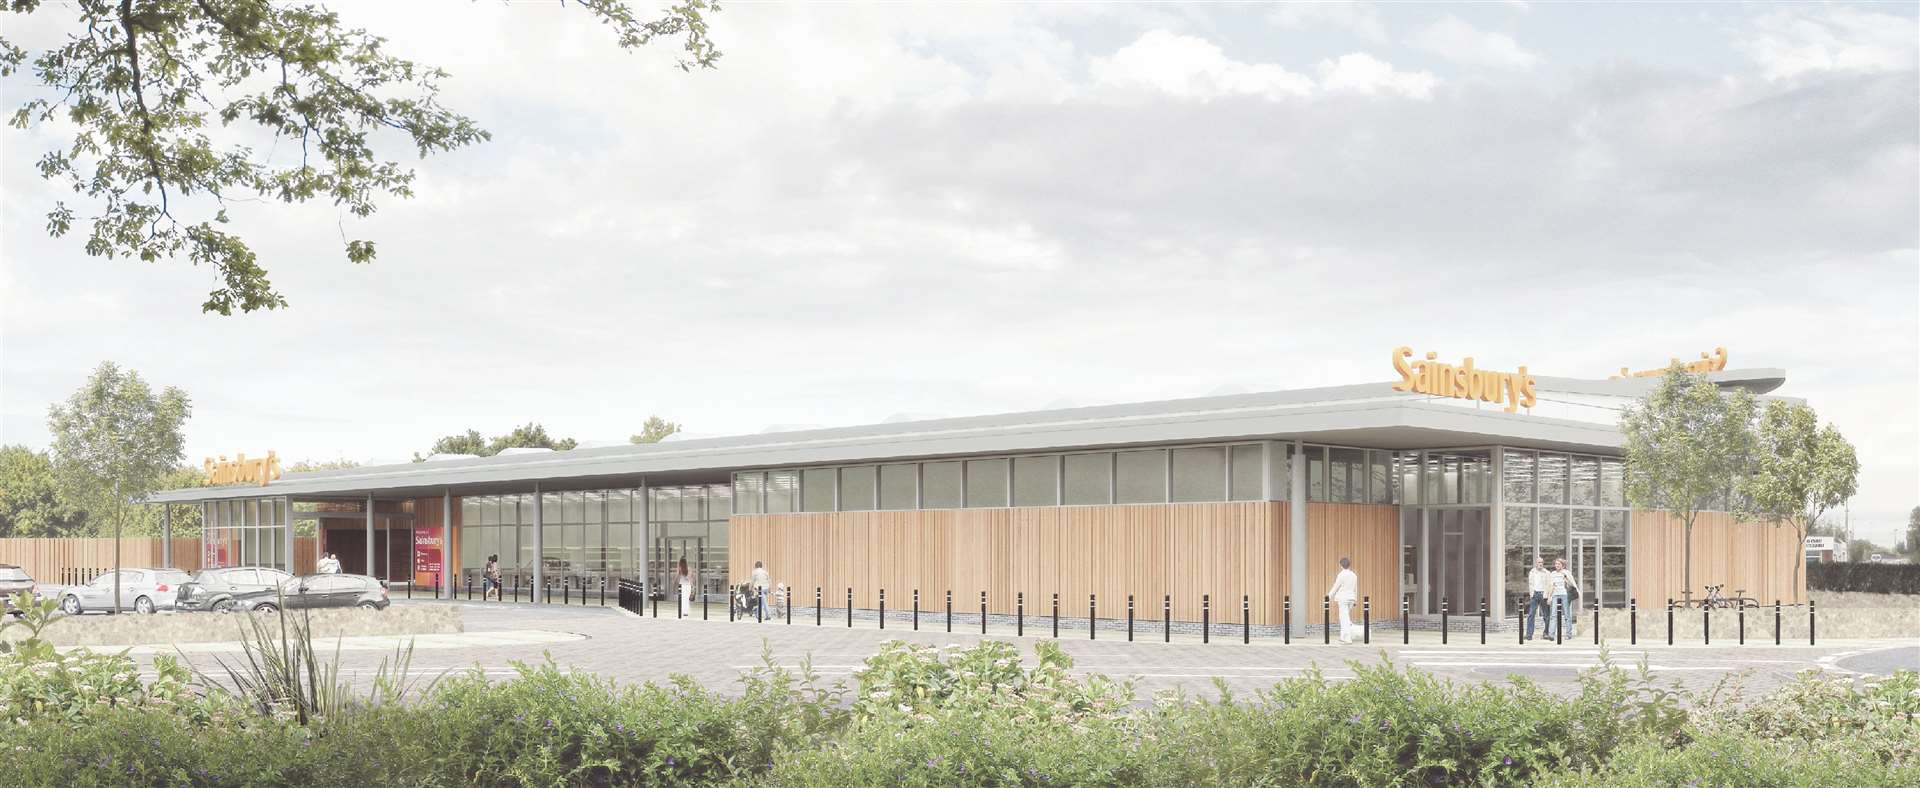 This CGI drawing shows how the new Sainsbury's will hopefully look when finished